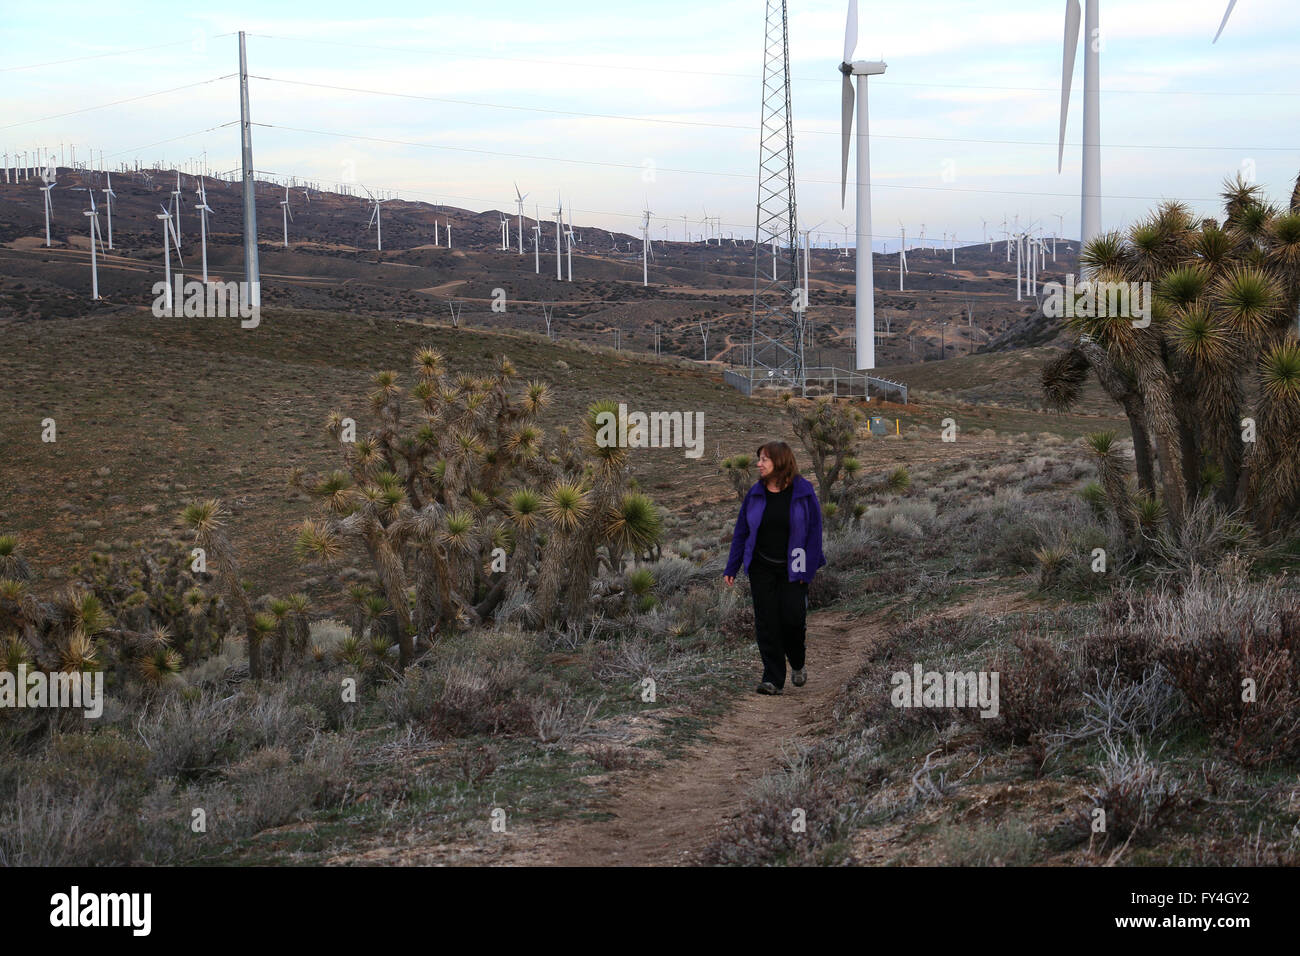 Hiker on Pacific Crest Trail with windmills Tehachapi California Stock Photo